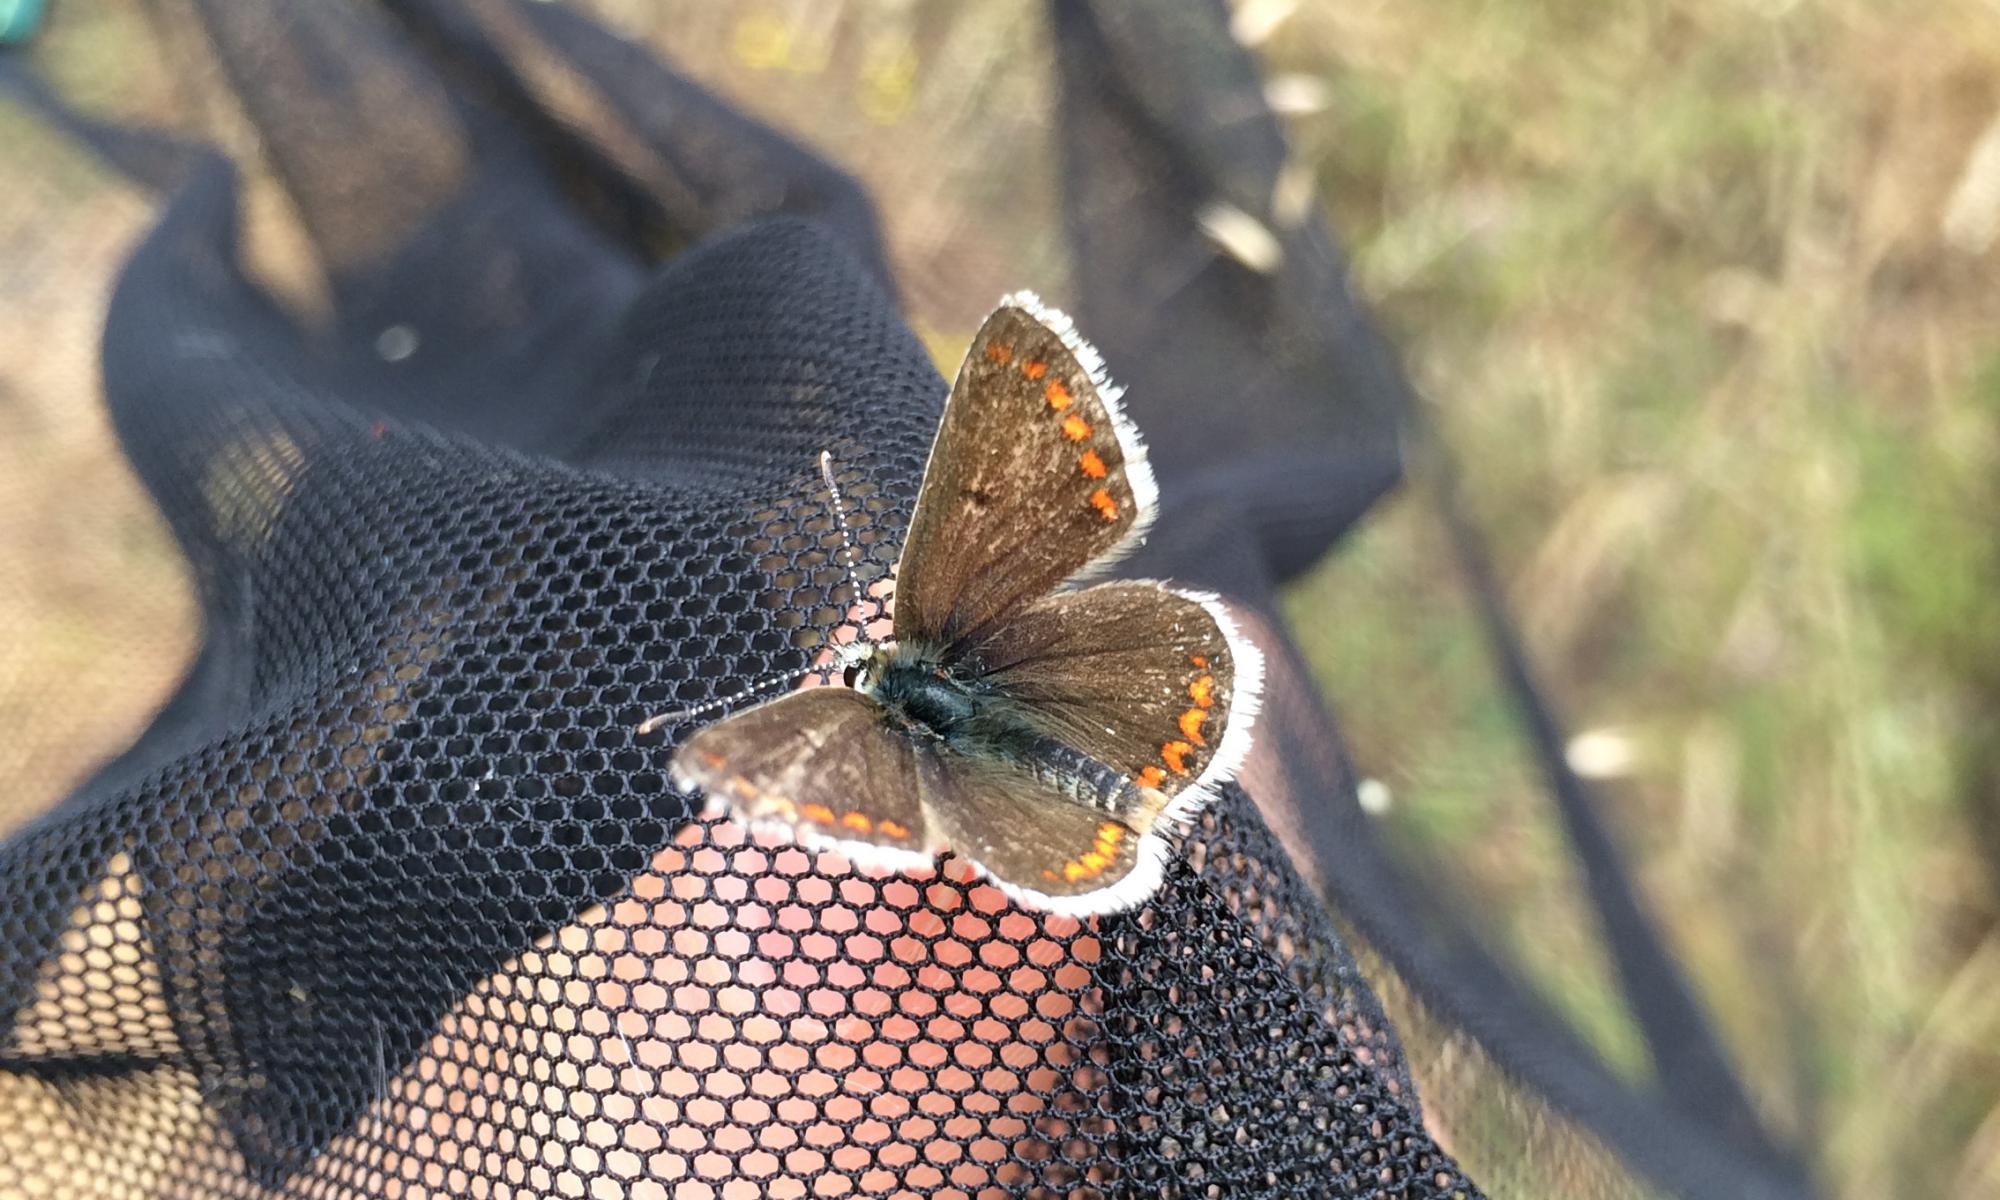 Scientists take temperatures of butterflies to uncover climate threat